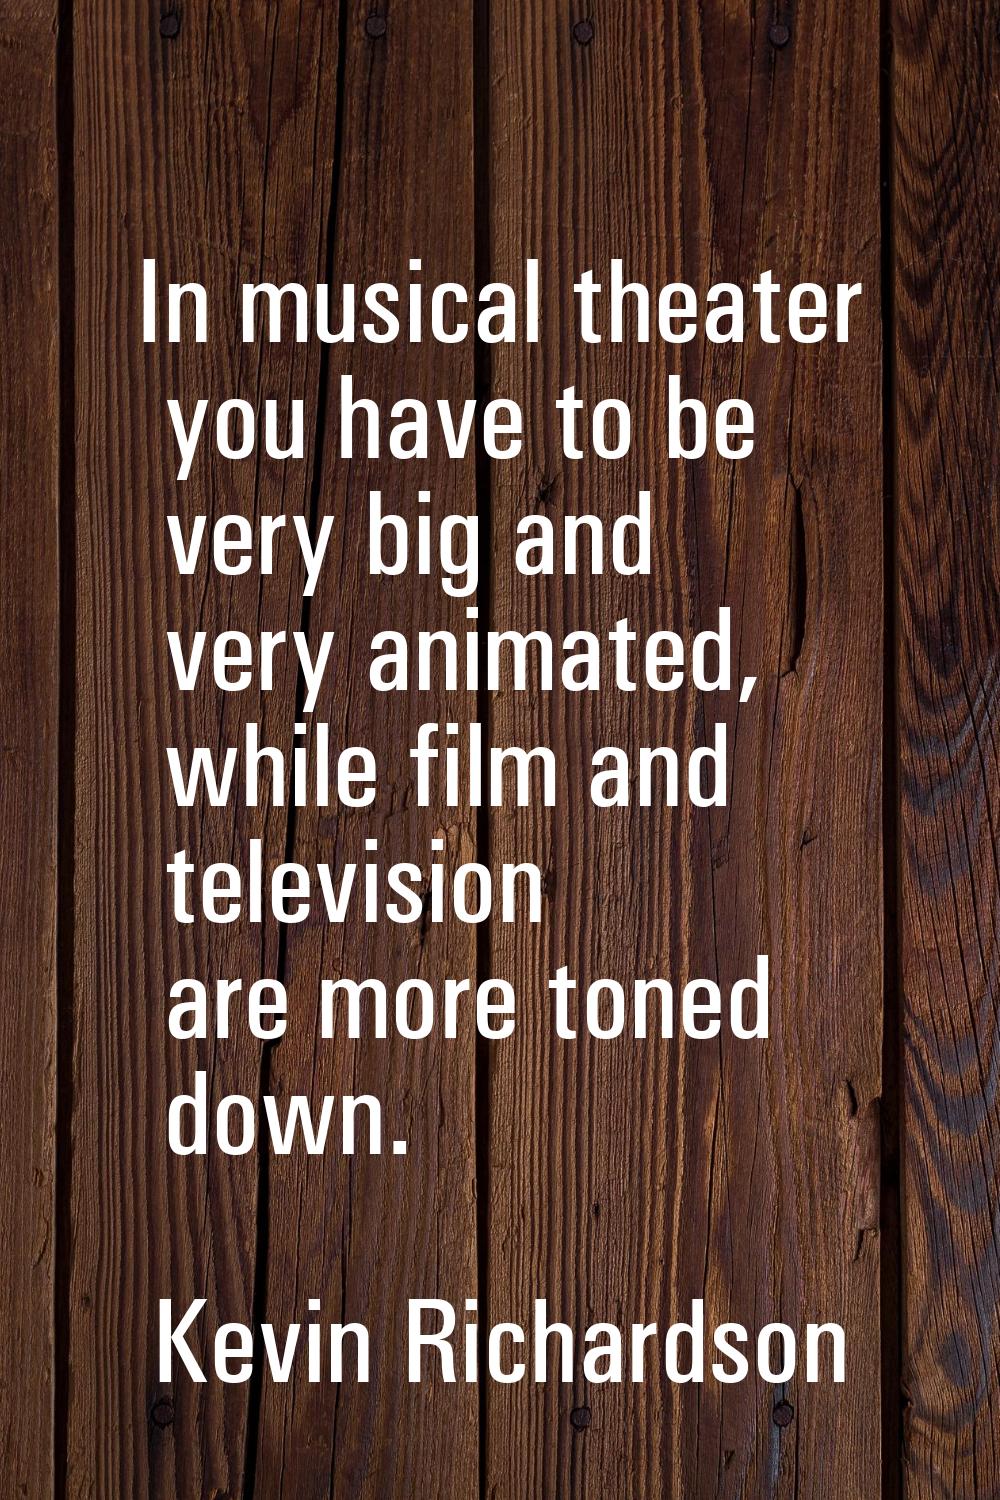 In musical theater you have to be very big and very animated, while film and television are more to